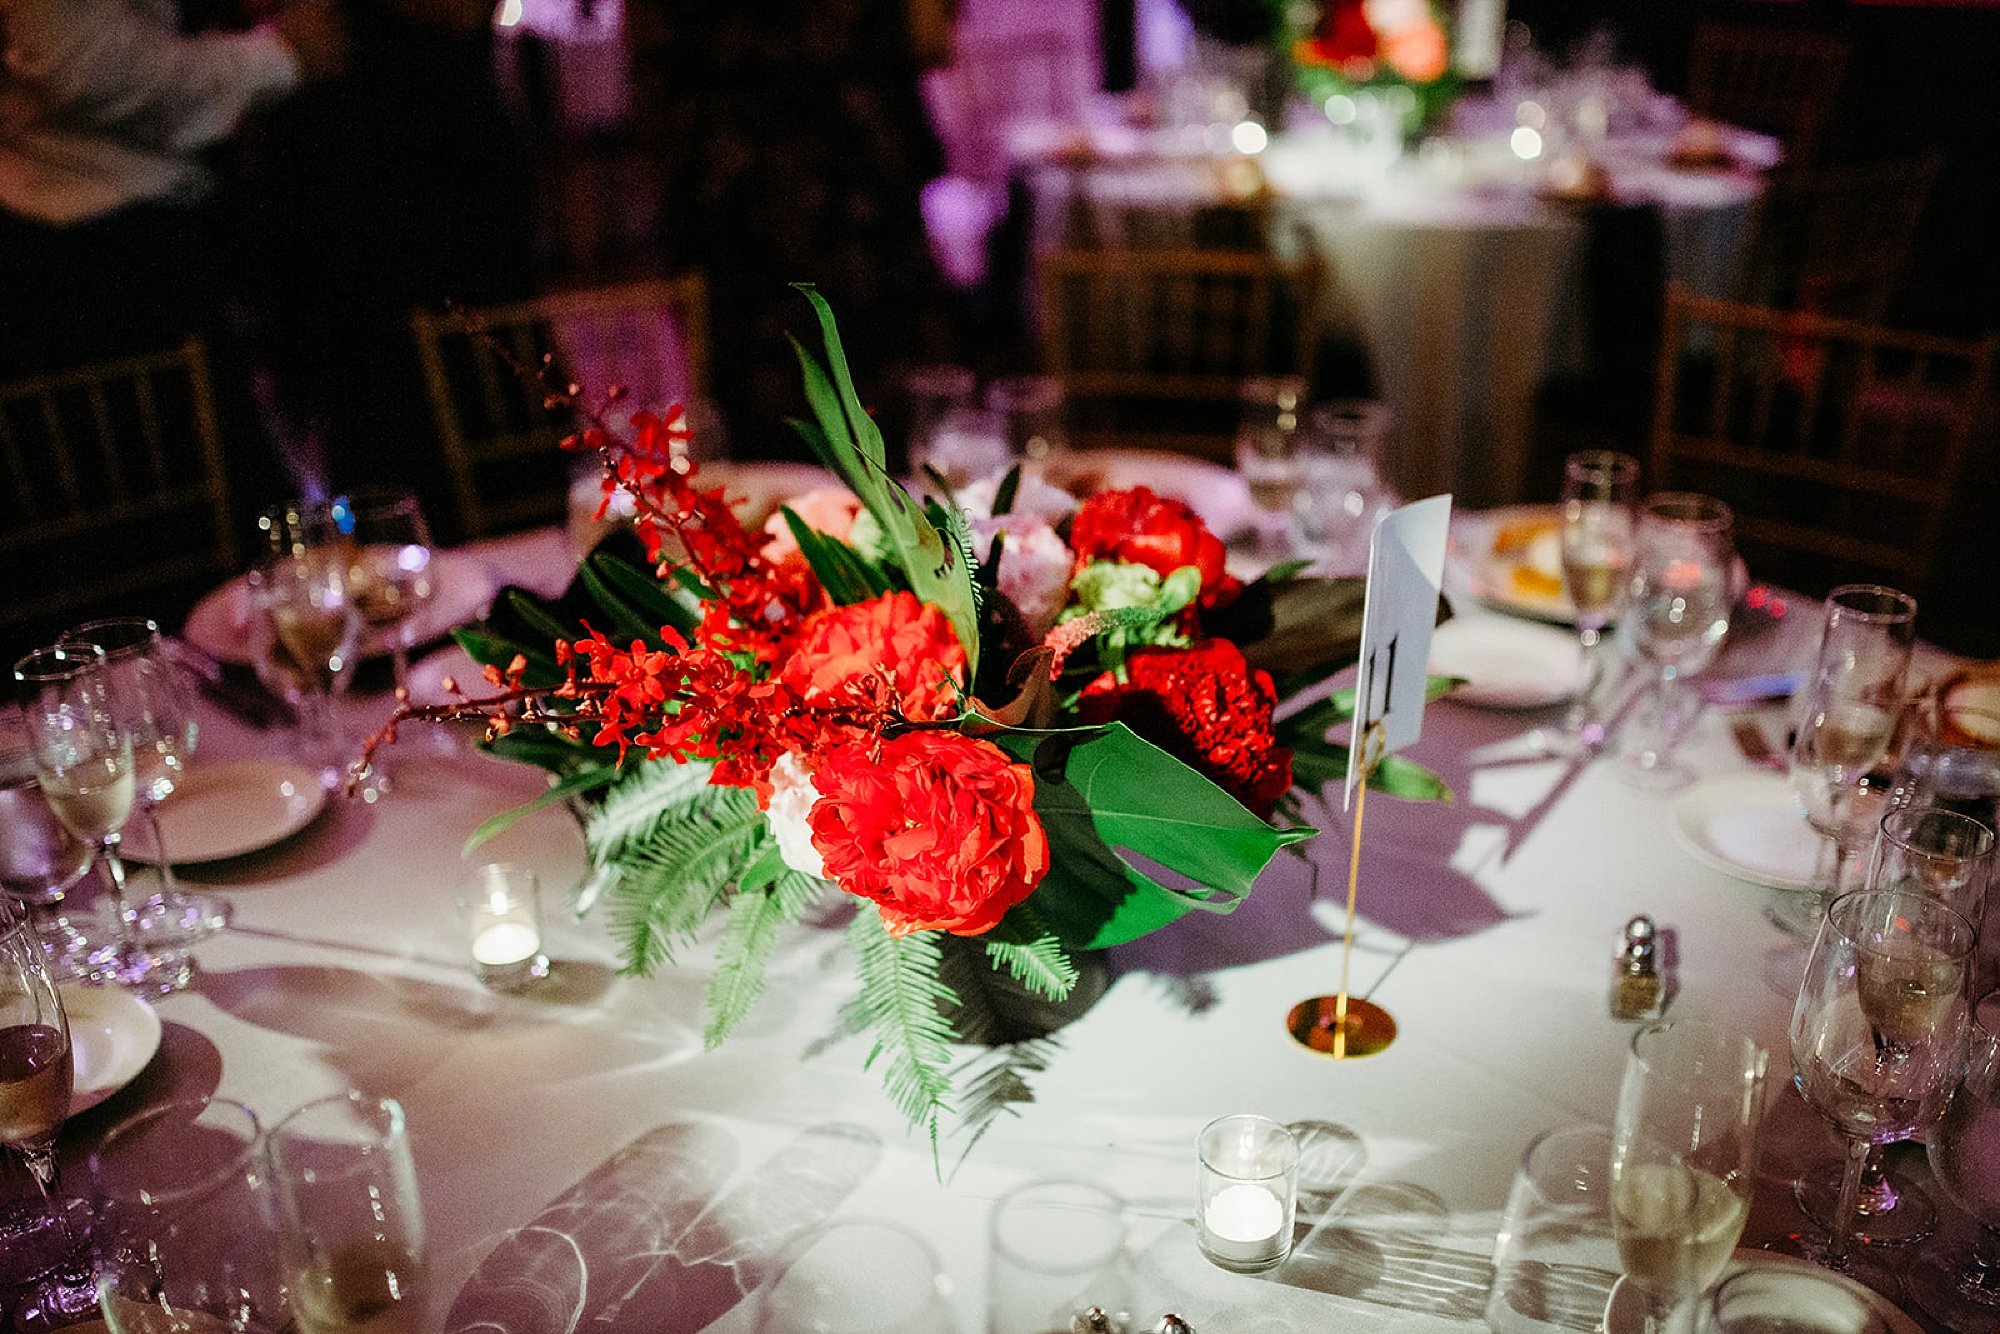 The Bronx Zoo wedding reception at the Old Lion House with red tropical floral centerpieces 